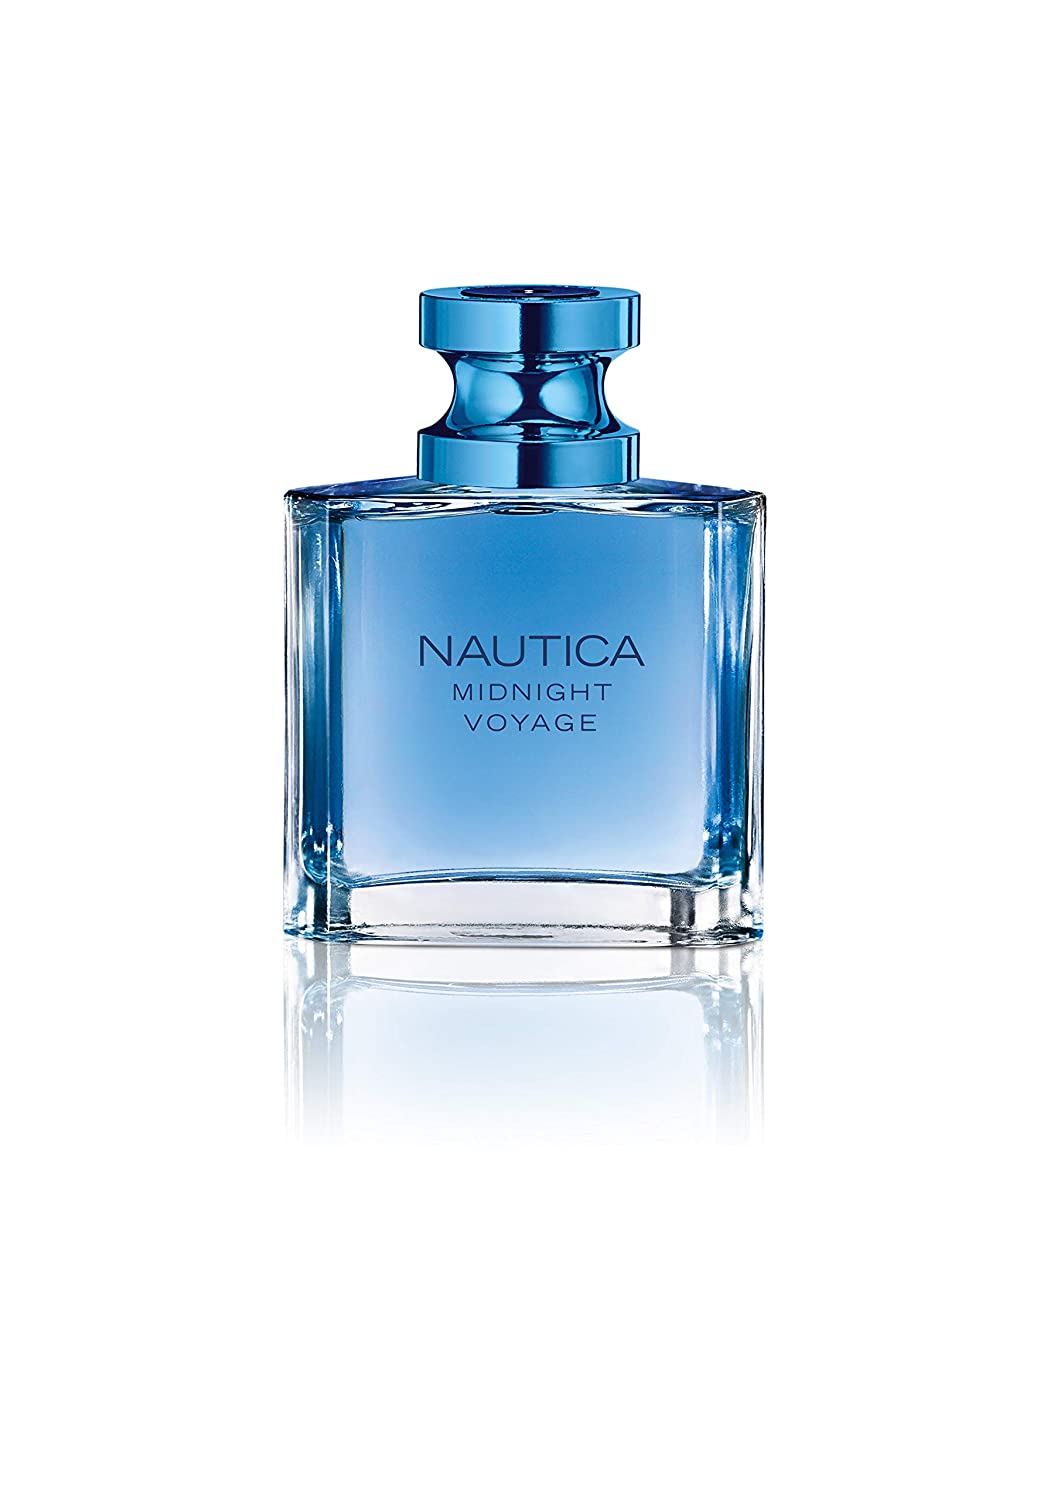 Nautica Voyage Eau De Toilette for Men - Woody, Aquatic Scent with Notes of Apple, Water Lotus, Cedarwood, and Musk - Fresh, Romantic, Fruity Aroma - Ideal for Day Wear - 3.3 Fl Oz